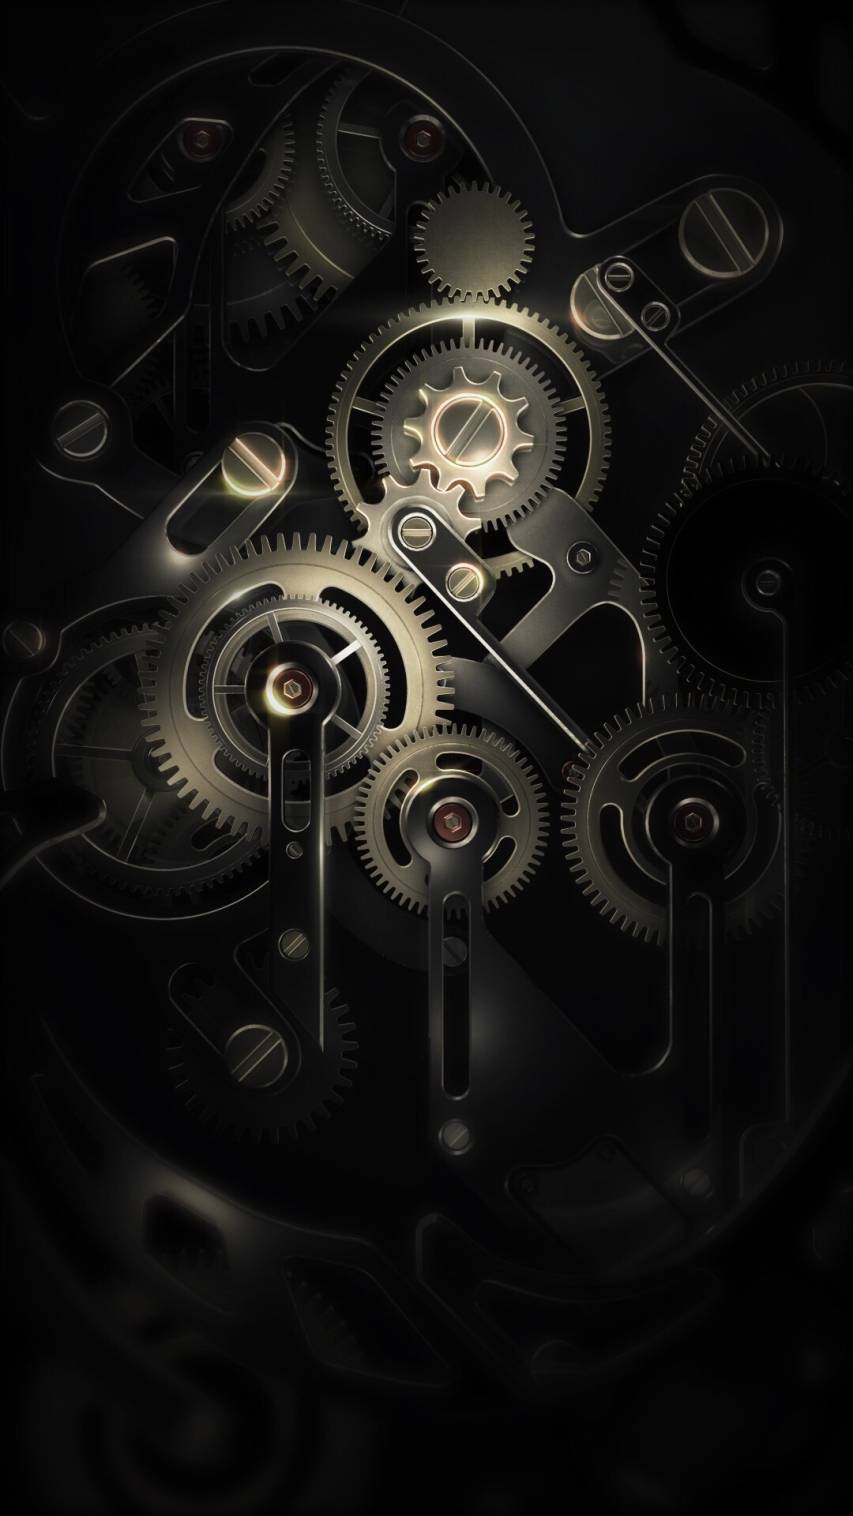 An artistic image of gears and cogs on a black background. - Steampunk